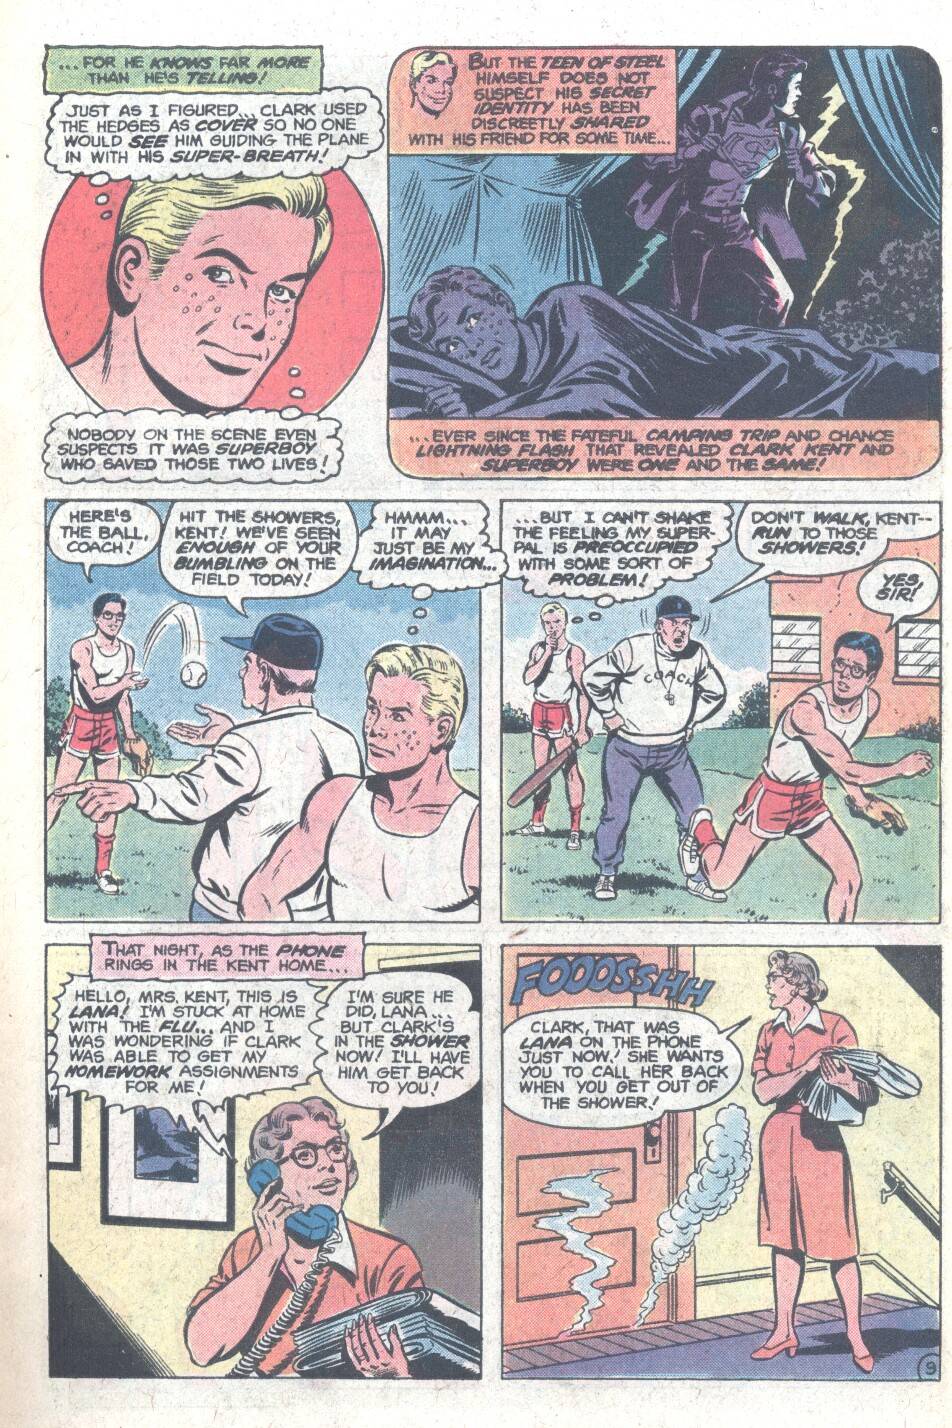 The New Adventures of Superboy 8 Page 9